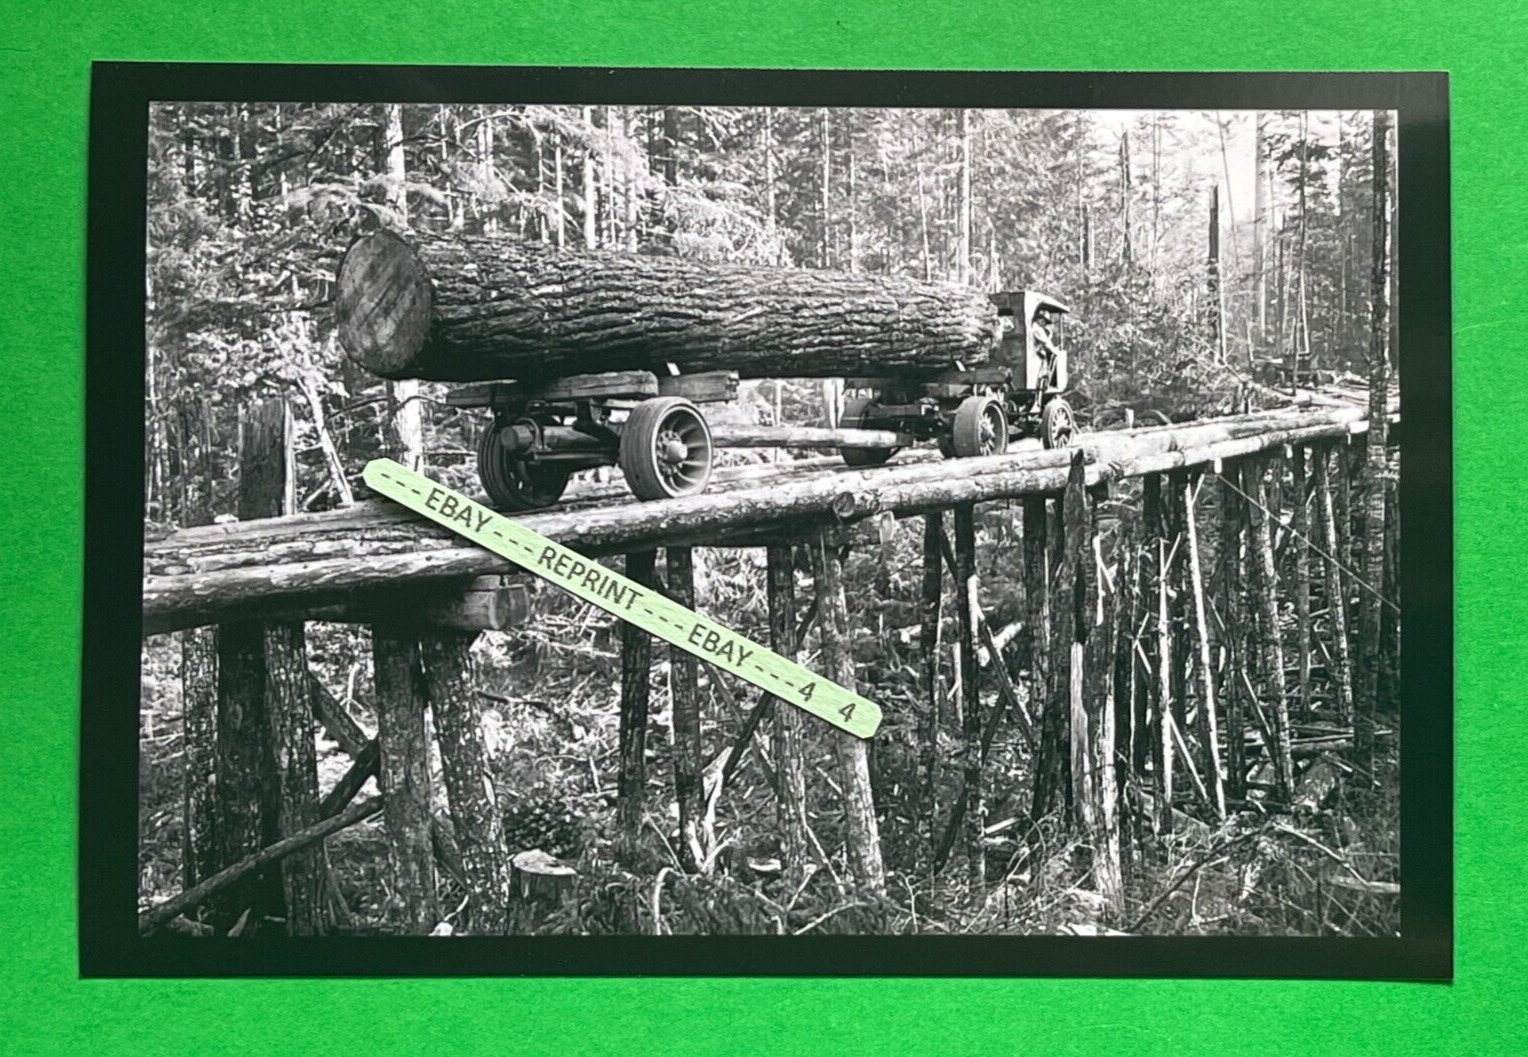 Found PHOTO of an Old Lumber Log Hauling Tractor Truck on Logging Bridge